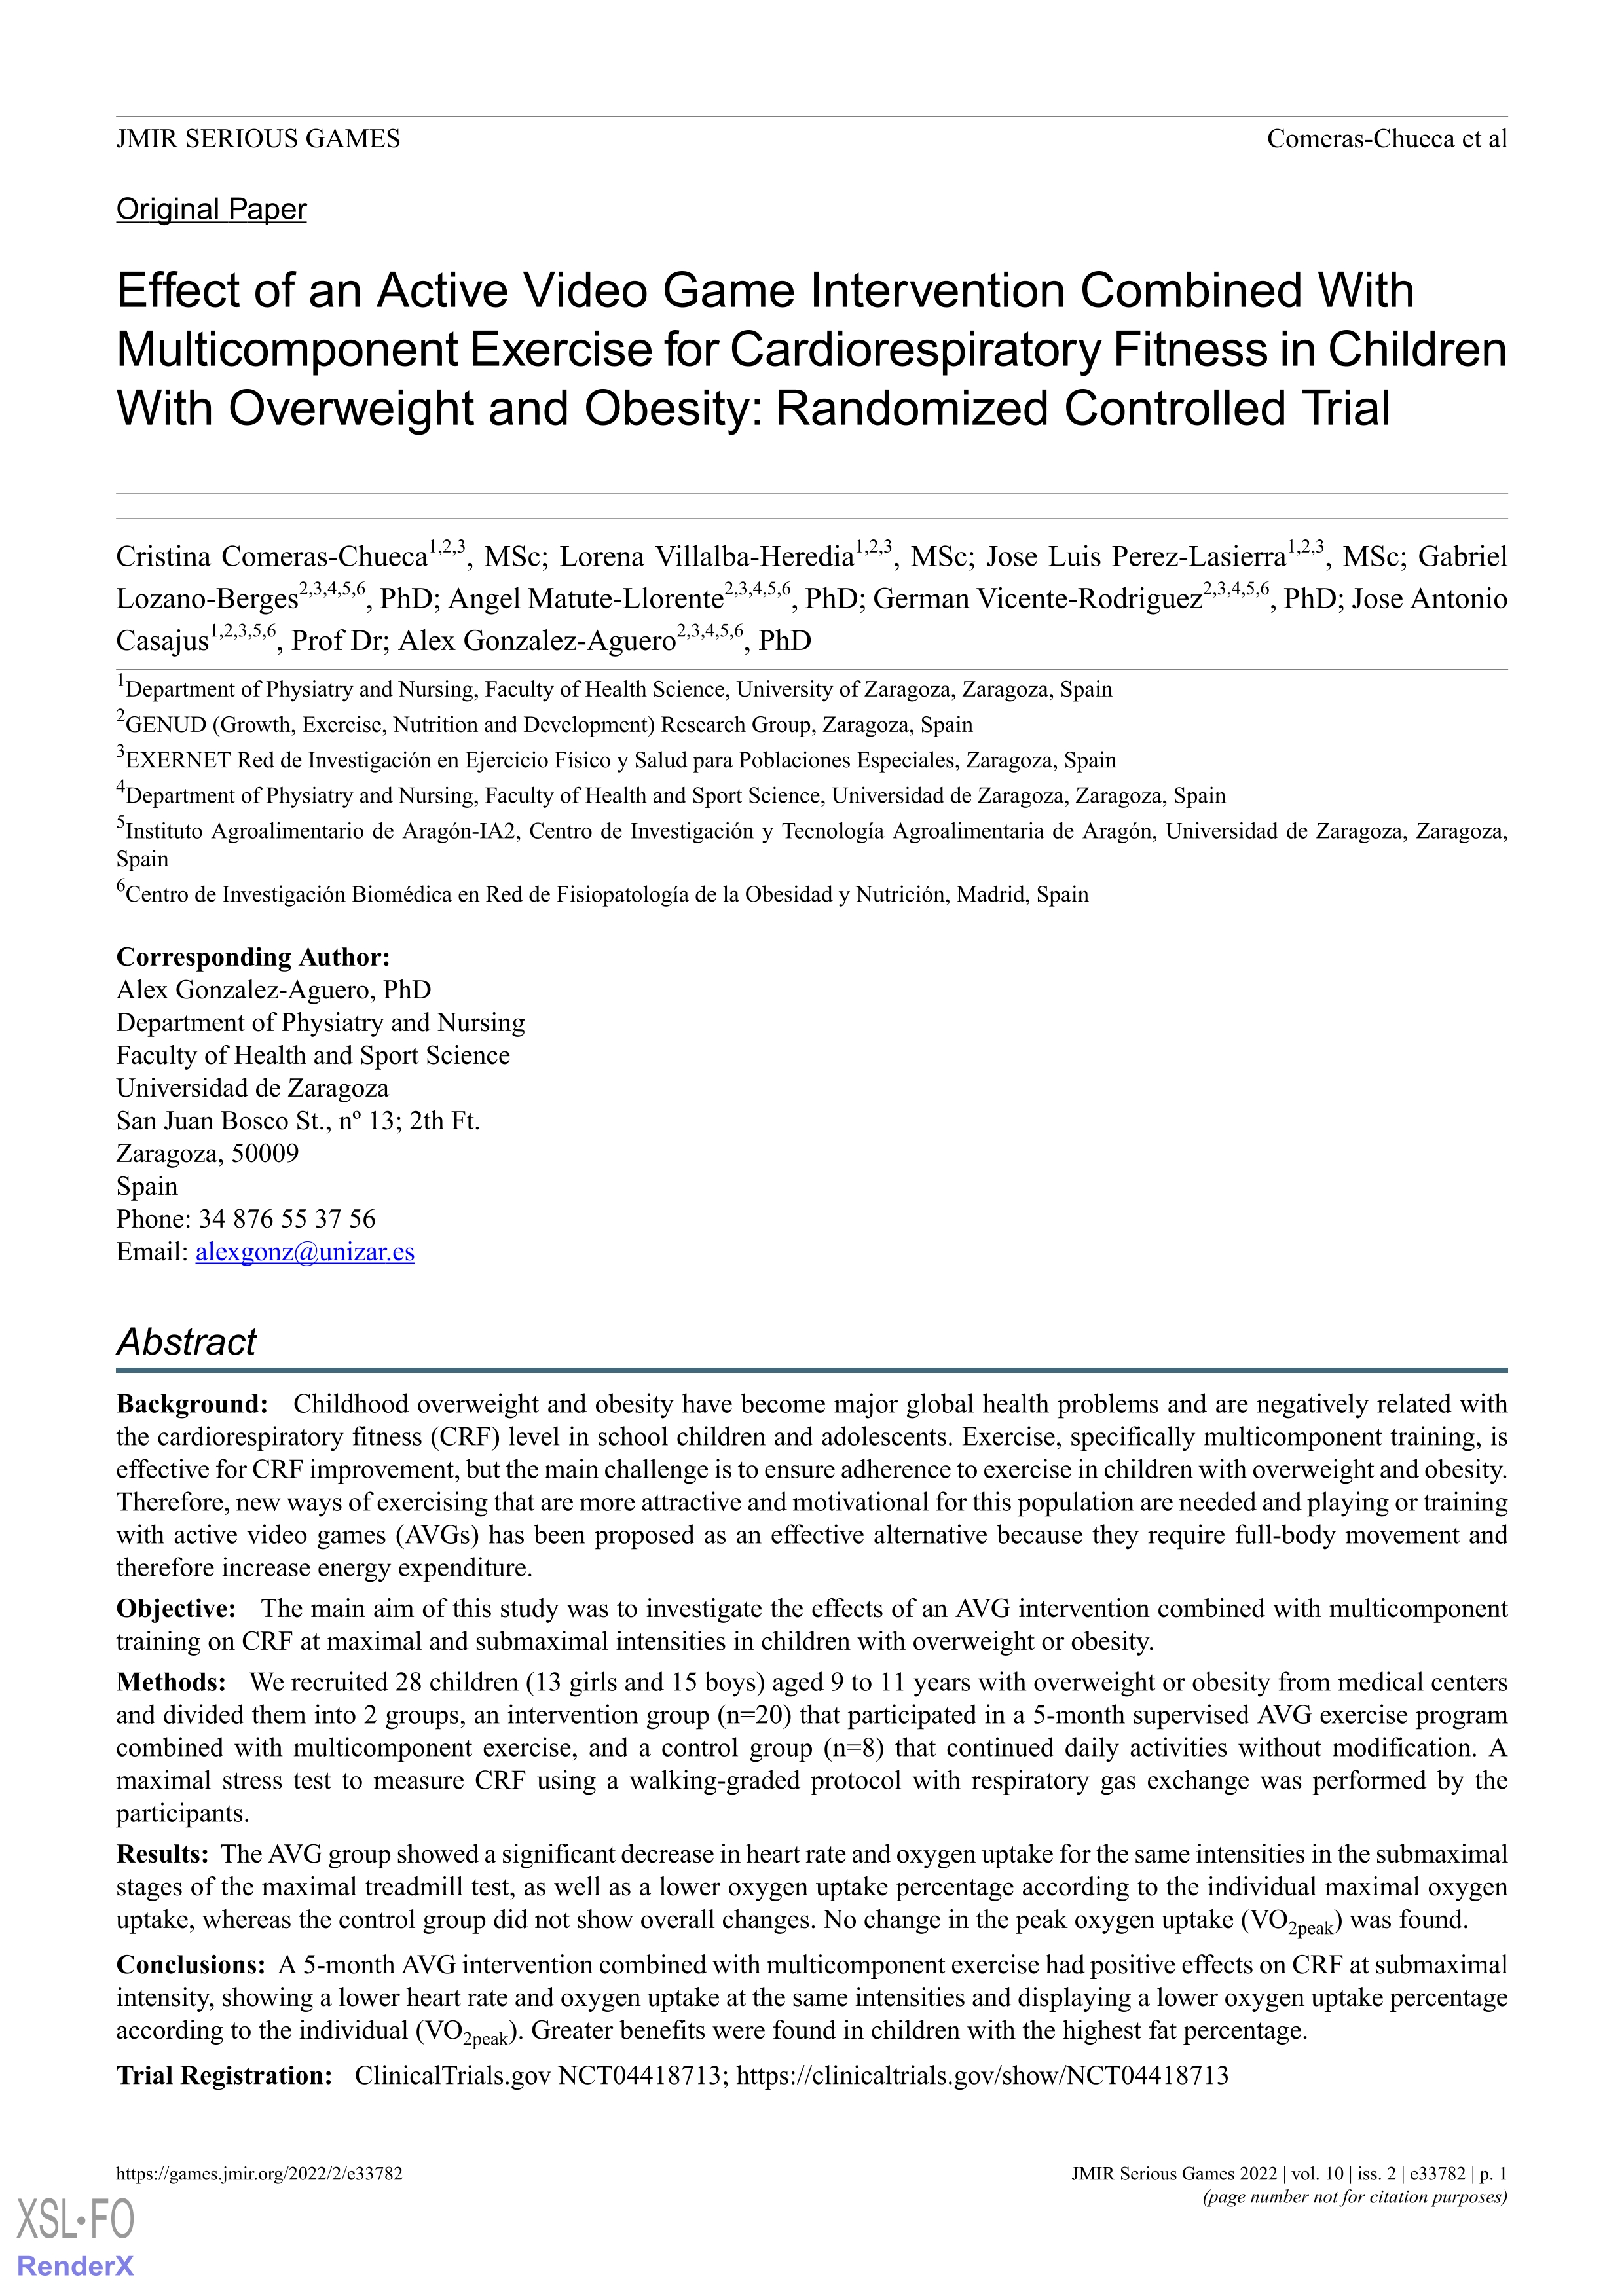 Effect of an active video game intervention combined with multicomponent exercise for cardiorespiratory fitness in children with overweight and obesity: randomized controlled trial